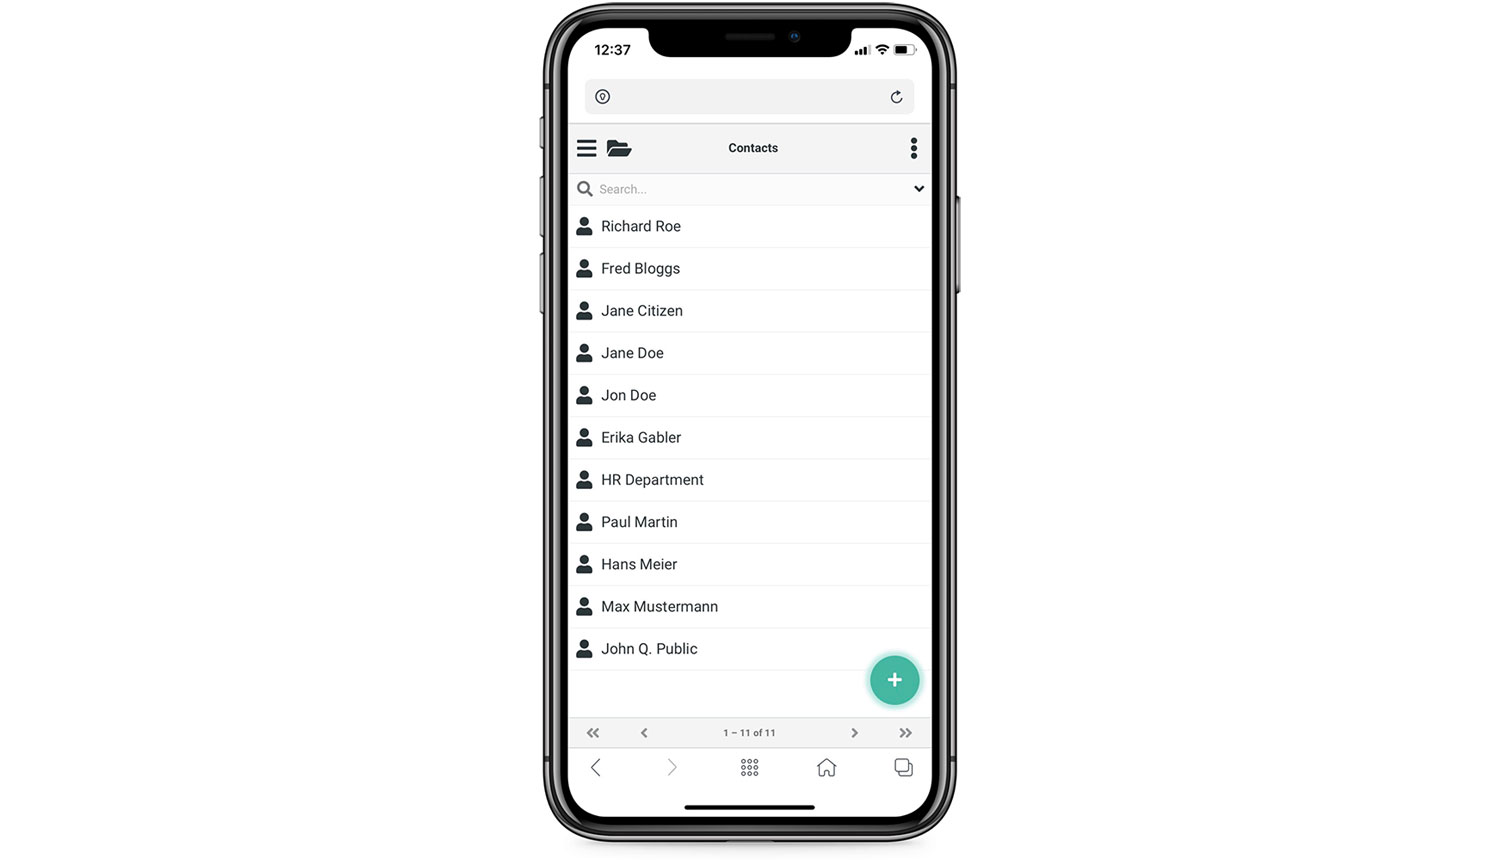 Contacts - Retarus Email Continuity Mobile UI